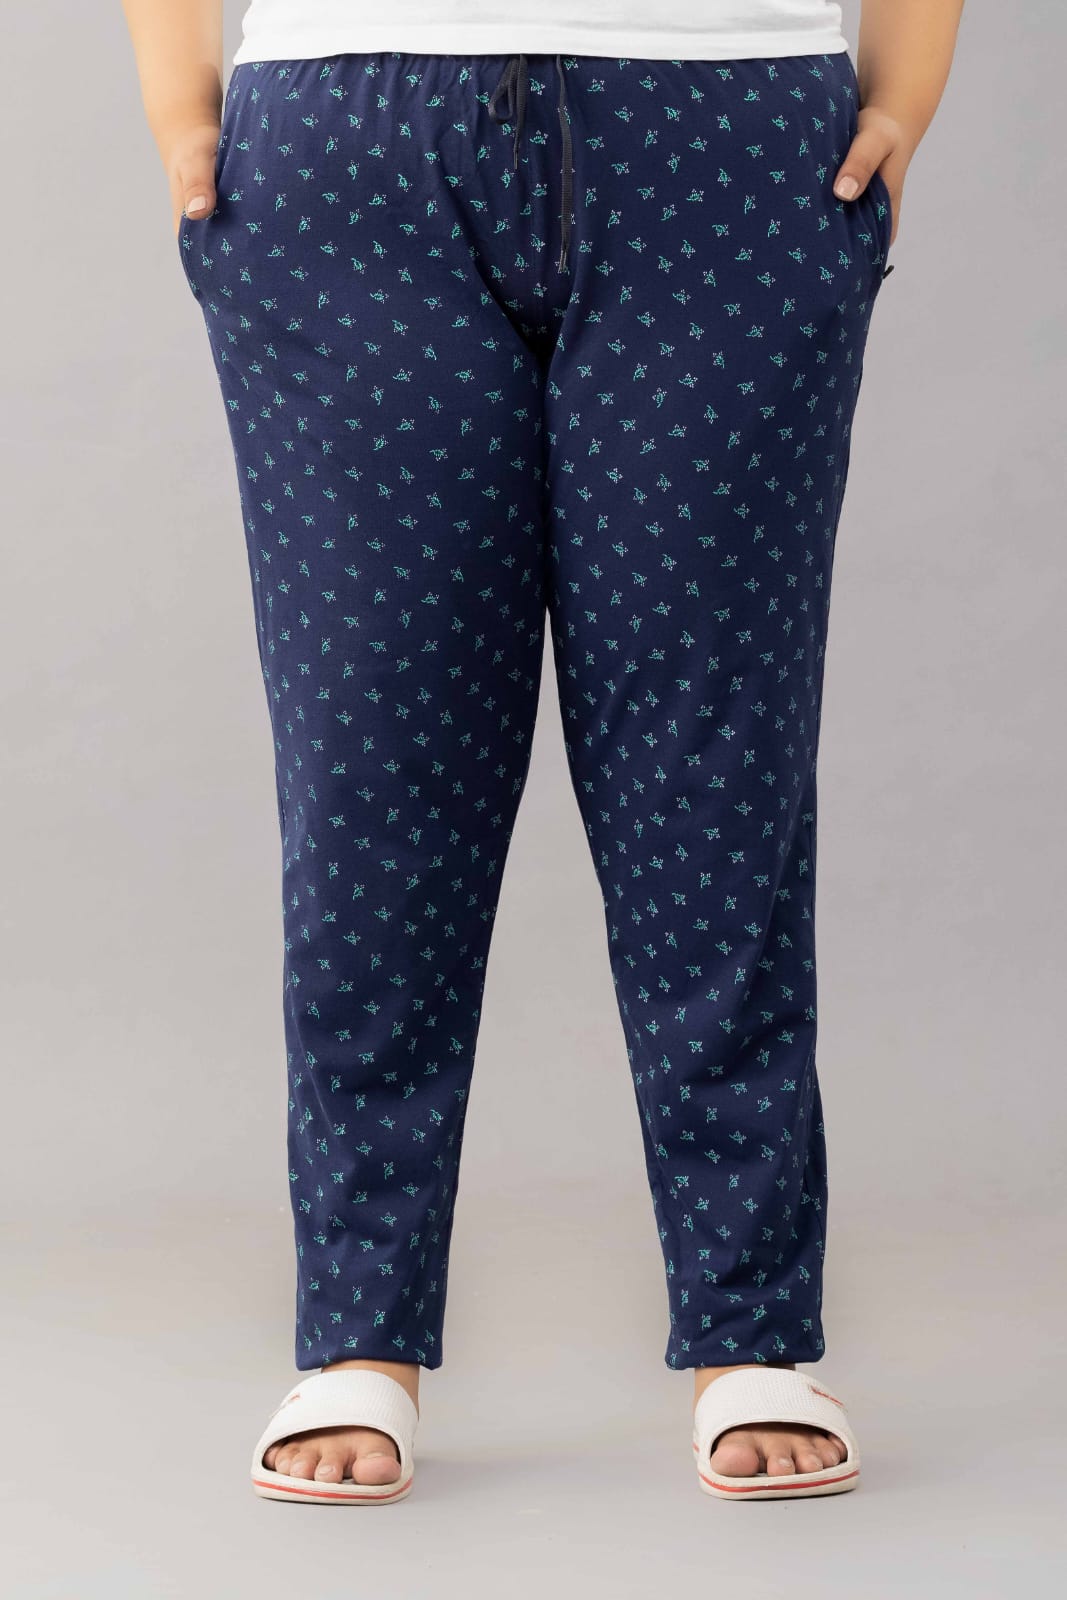 All Day Night Printed Cotton Pants For Women - Navy Blue